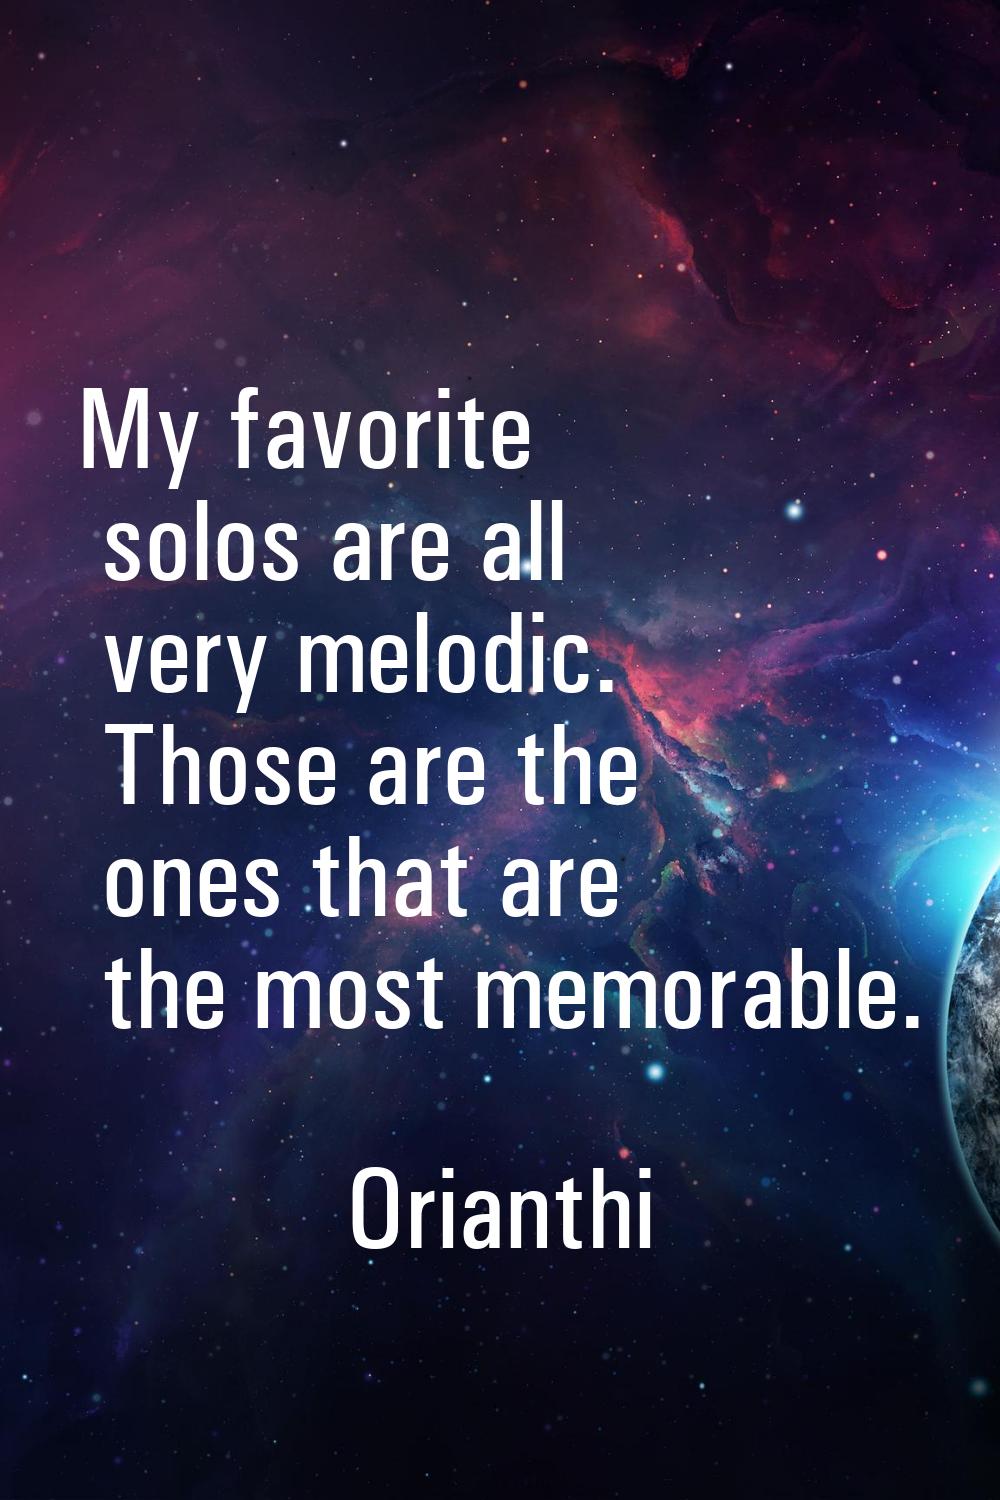 My favorite solos are all very melodic. Those are the ones that are the most memorable.